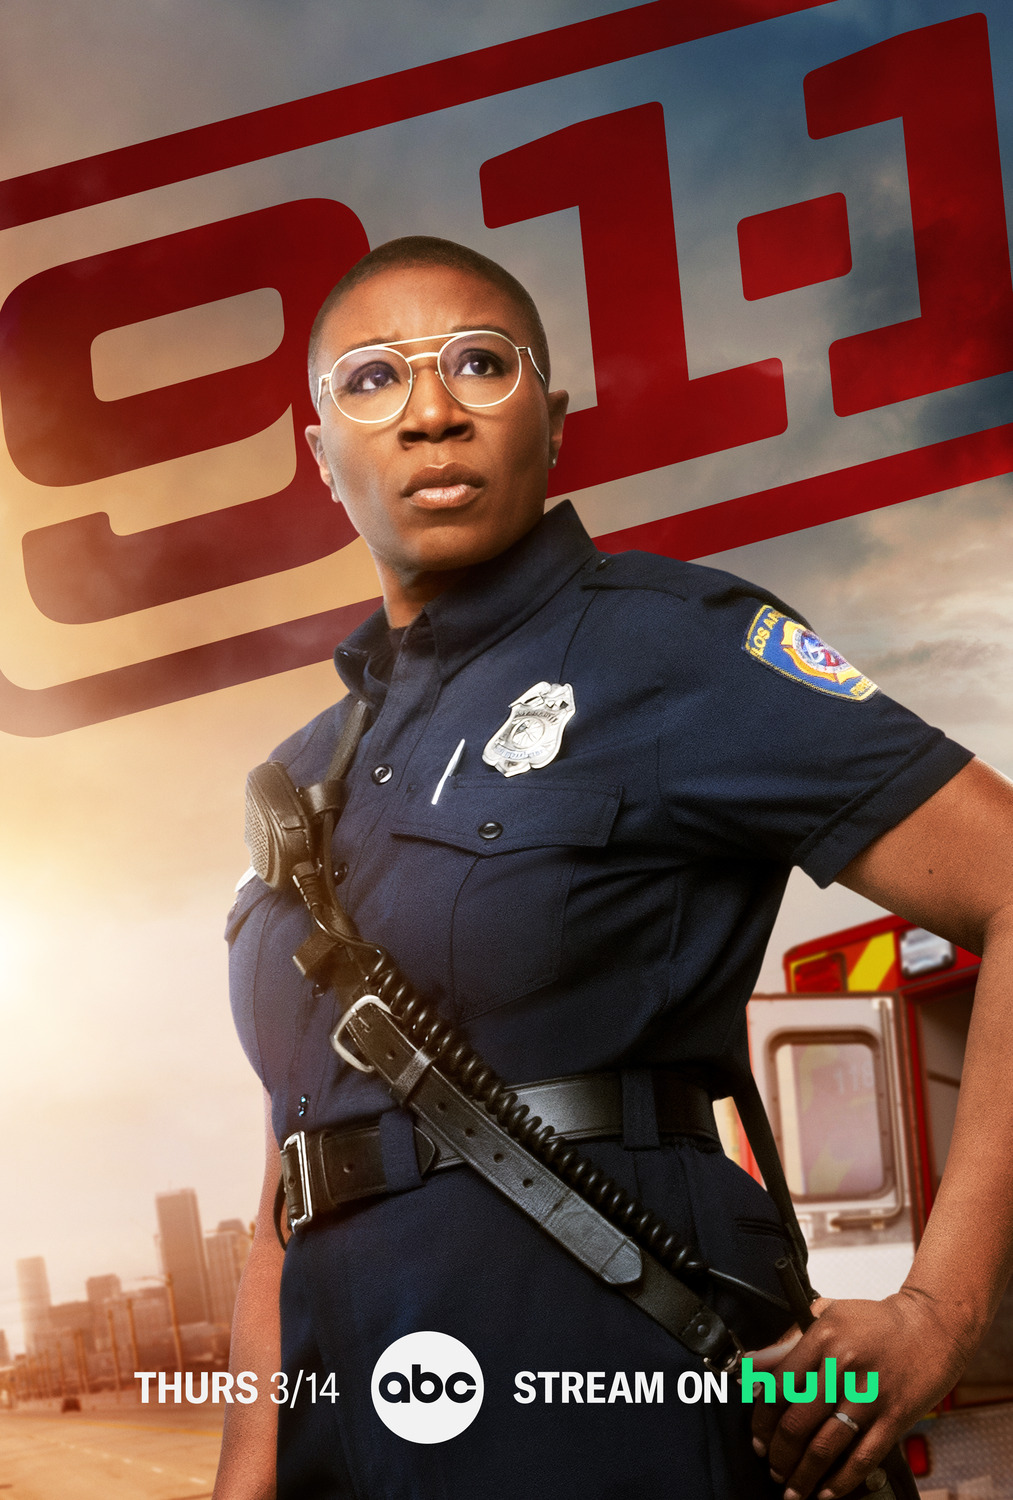 Extra Large TV Poster Image for 9-1-1 (#19 of 26)